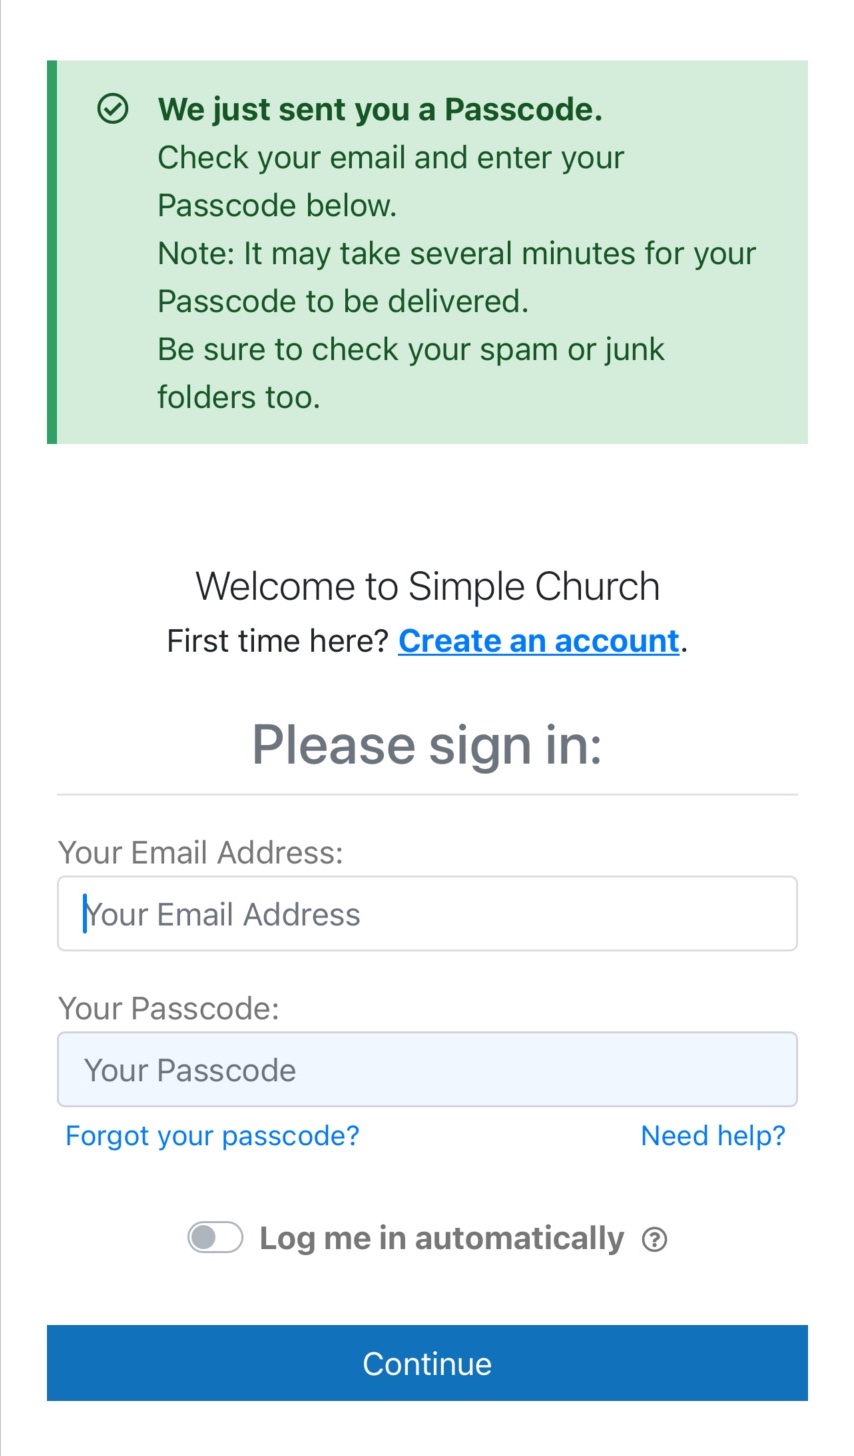 How to create an account in the church app